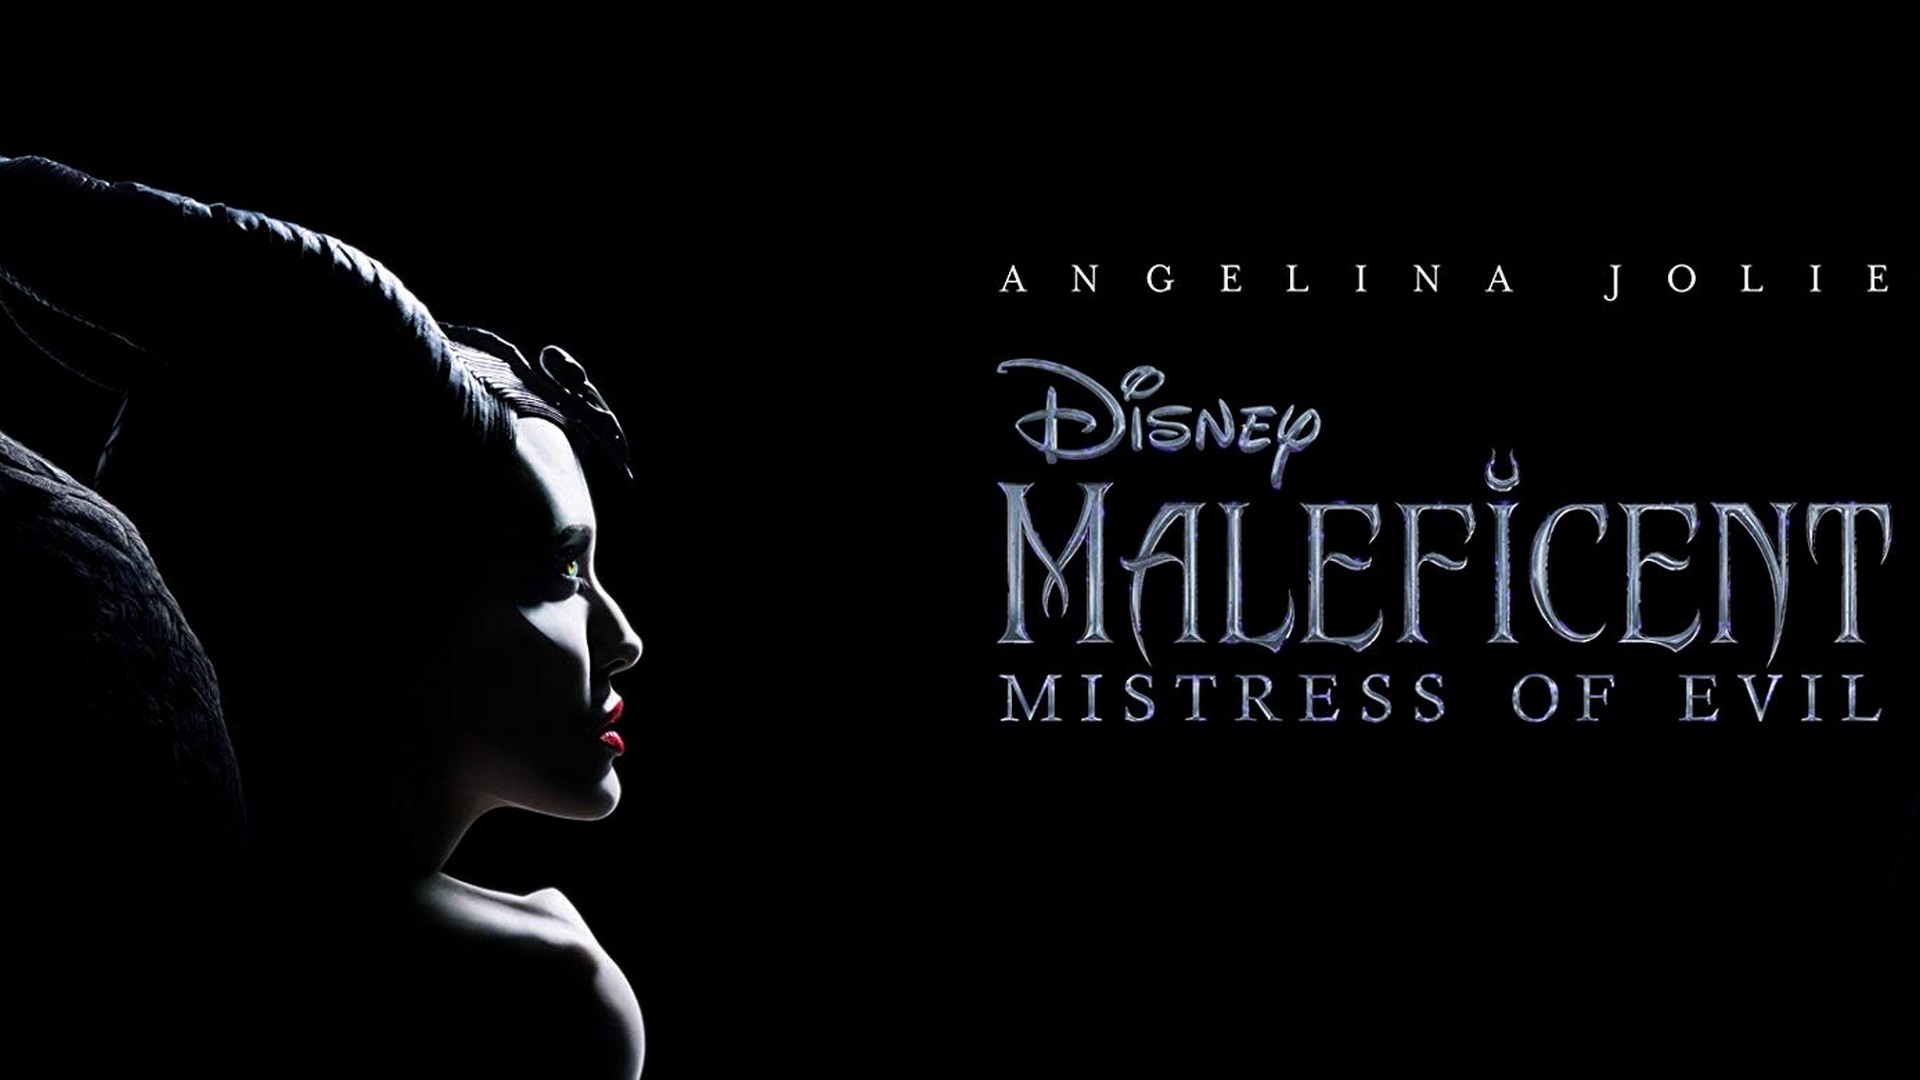 Maleficent Mistress of Evil Full Movie Wallpaper with high-resolution 1920x1080 pixel. You can use this poster wallpaper for your Desktop Computers, Mac Screensavers, Windows Backgrounds, iPhone Wallpapers, Tablet or Android Lock screen and another Mobile device